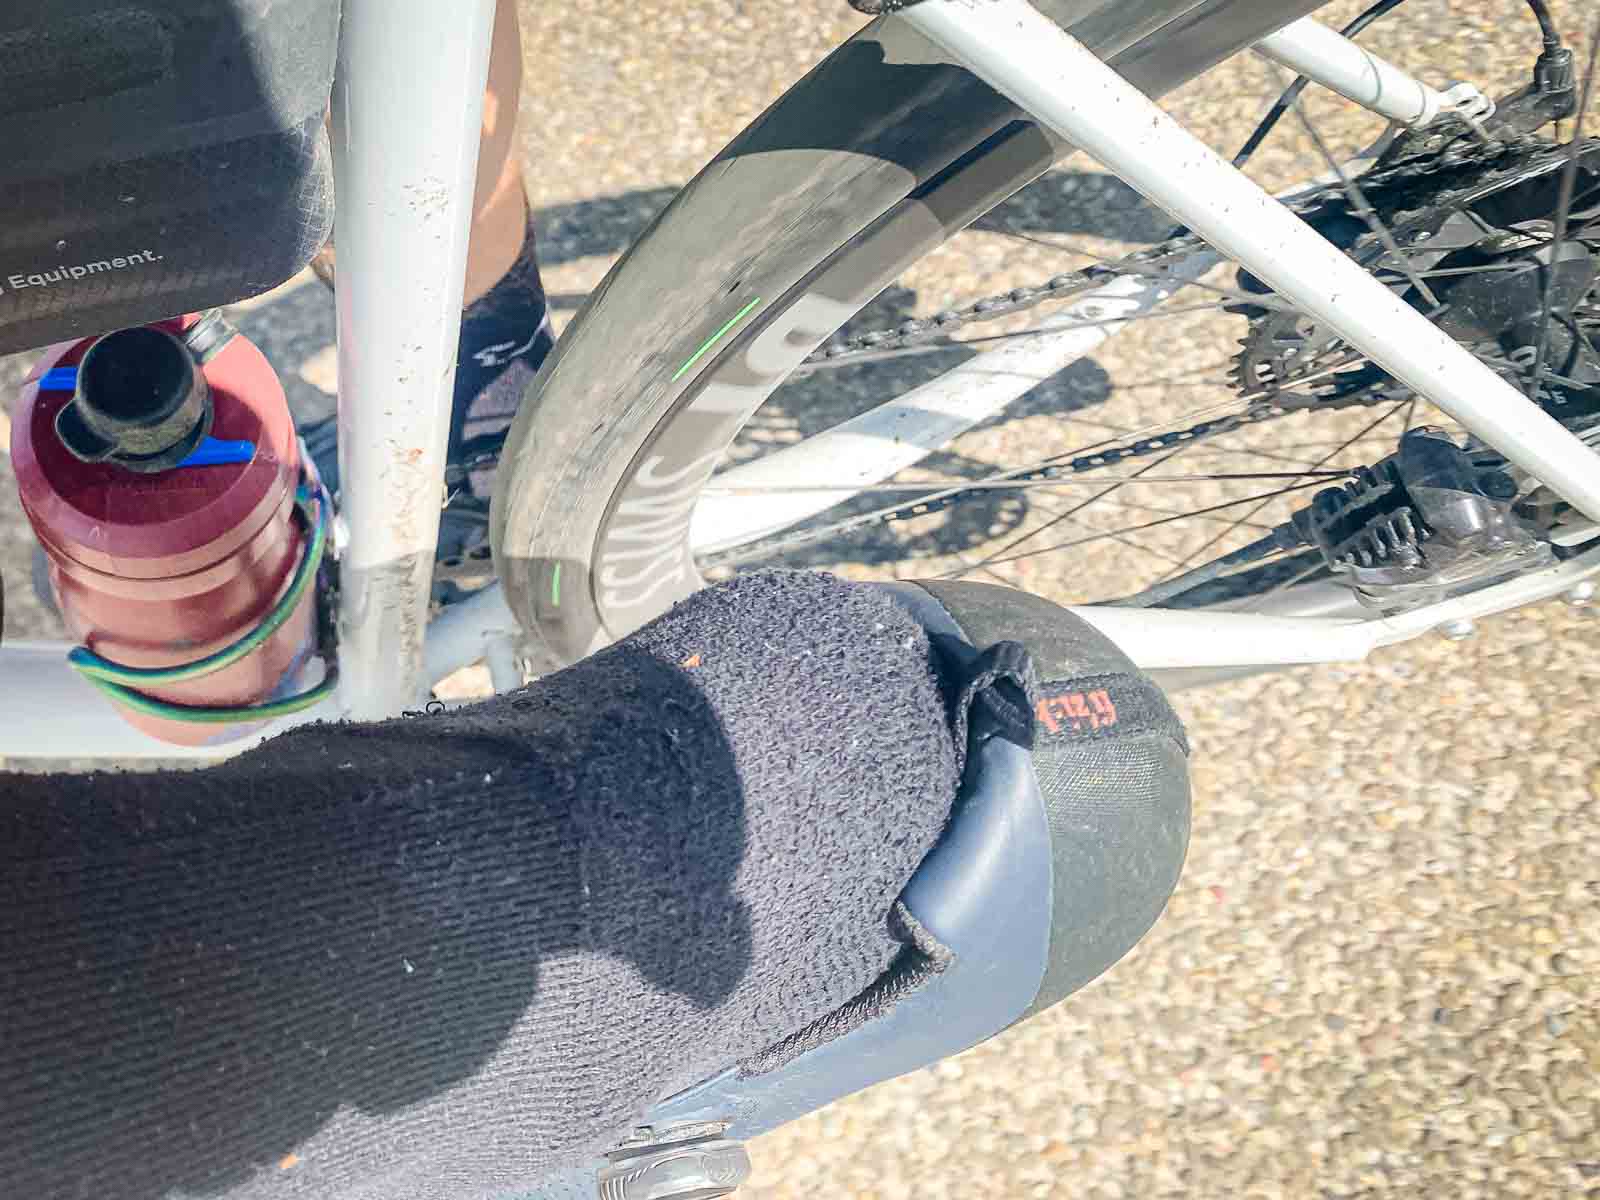 A pick protrudes from a cycling shoe while riding